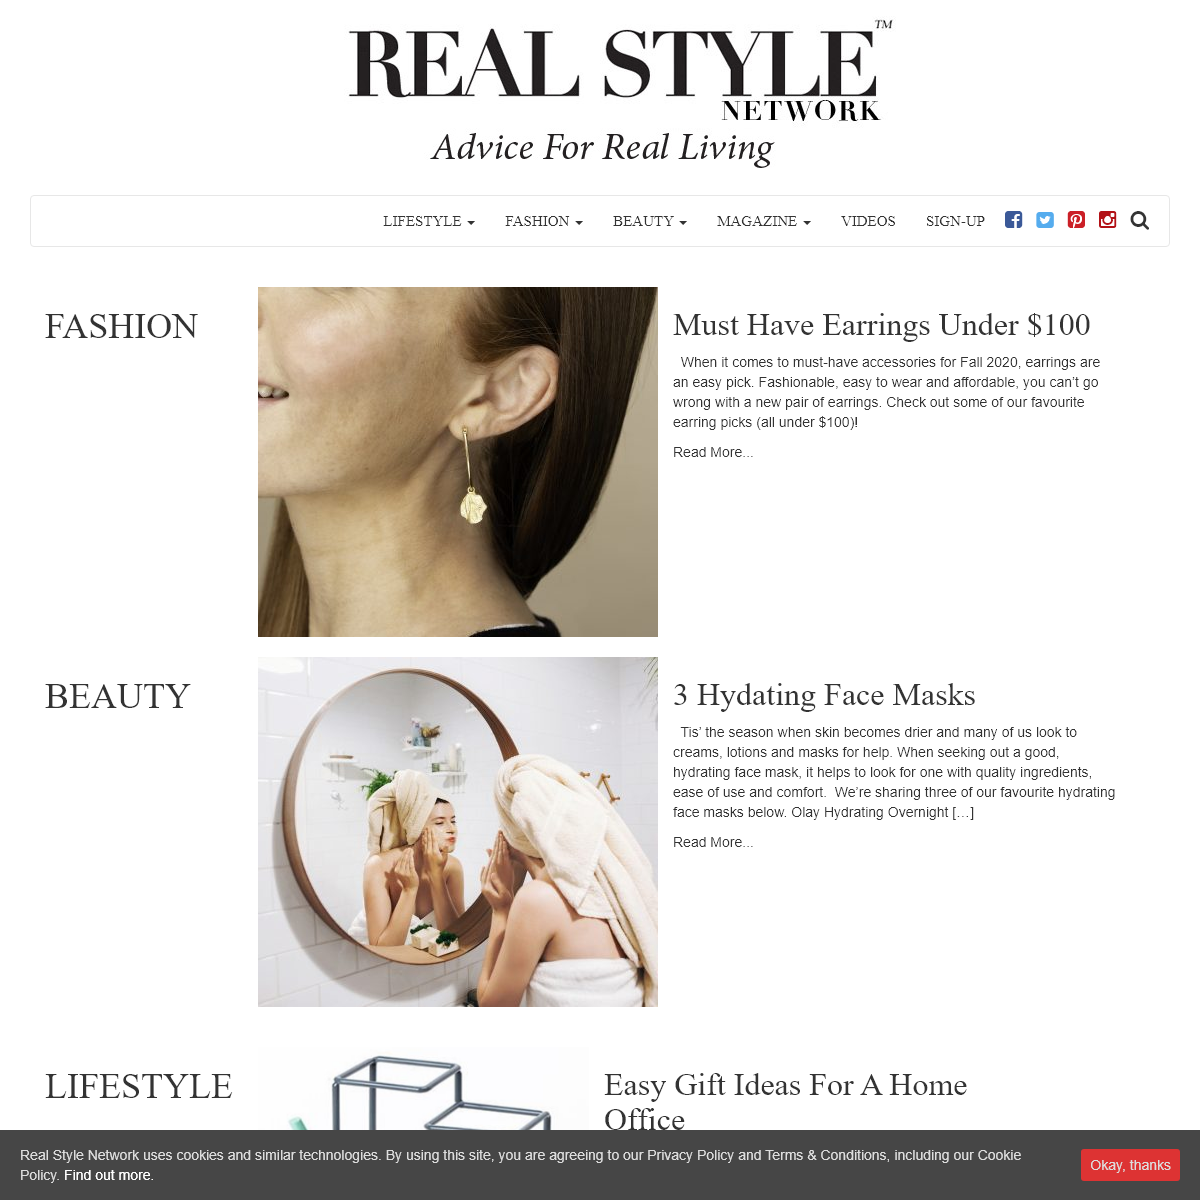 A complete backup of realstylenetwork.com